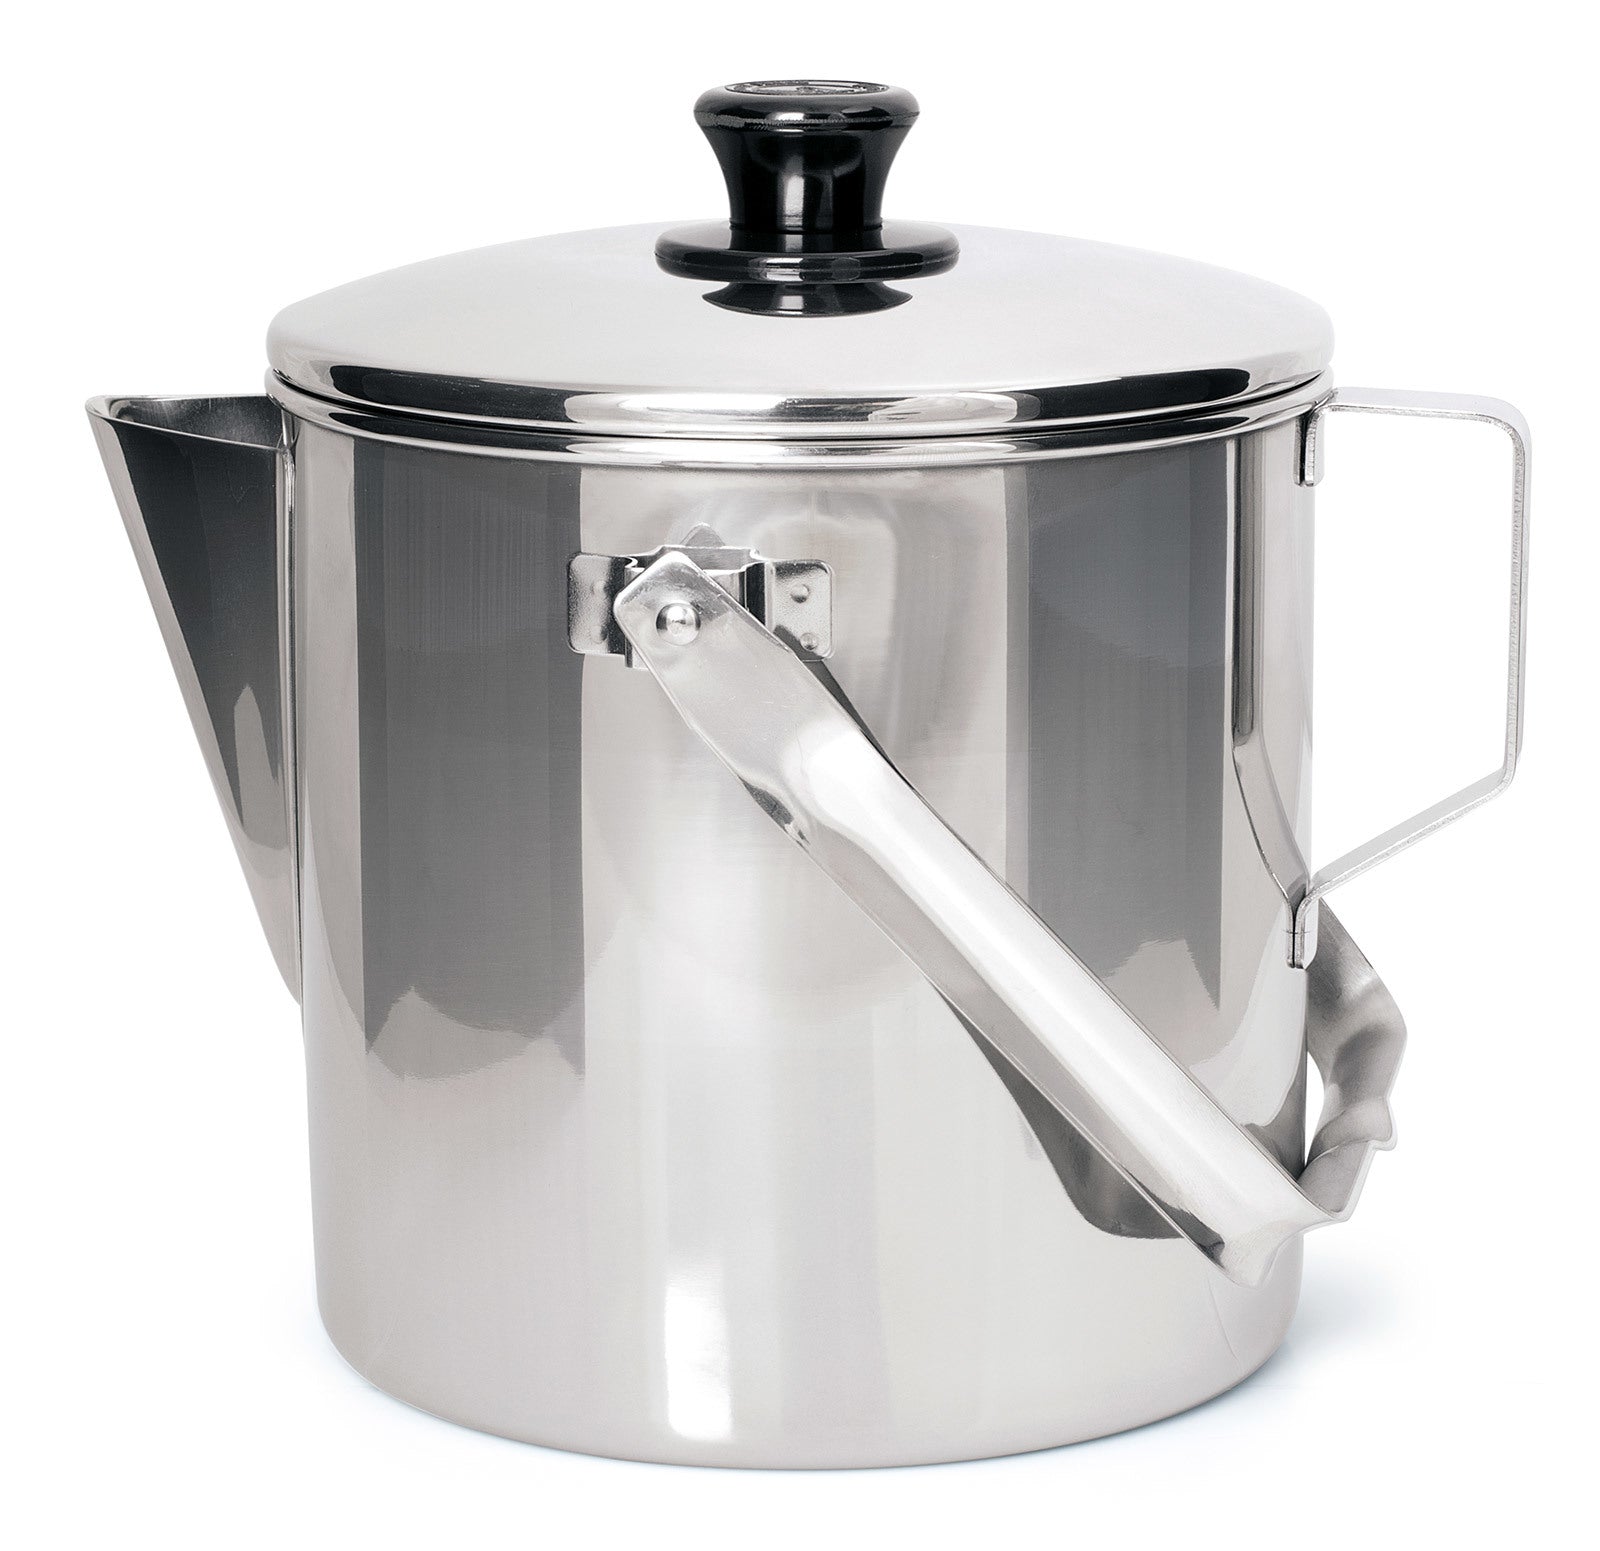 Zebra Stainless Steel Camping Kettle 14cm with Lid -  - Mansfield Hunting & Fishing - Products to prepare for Corona Virus